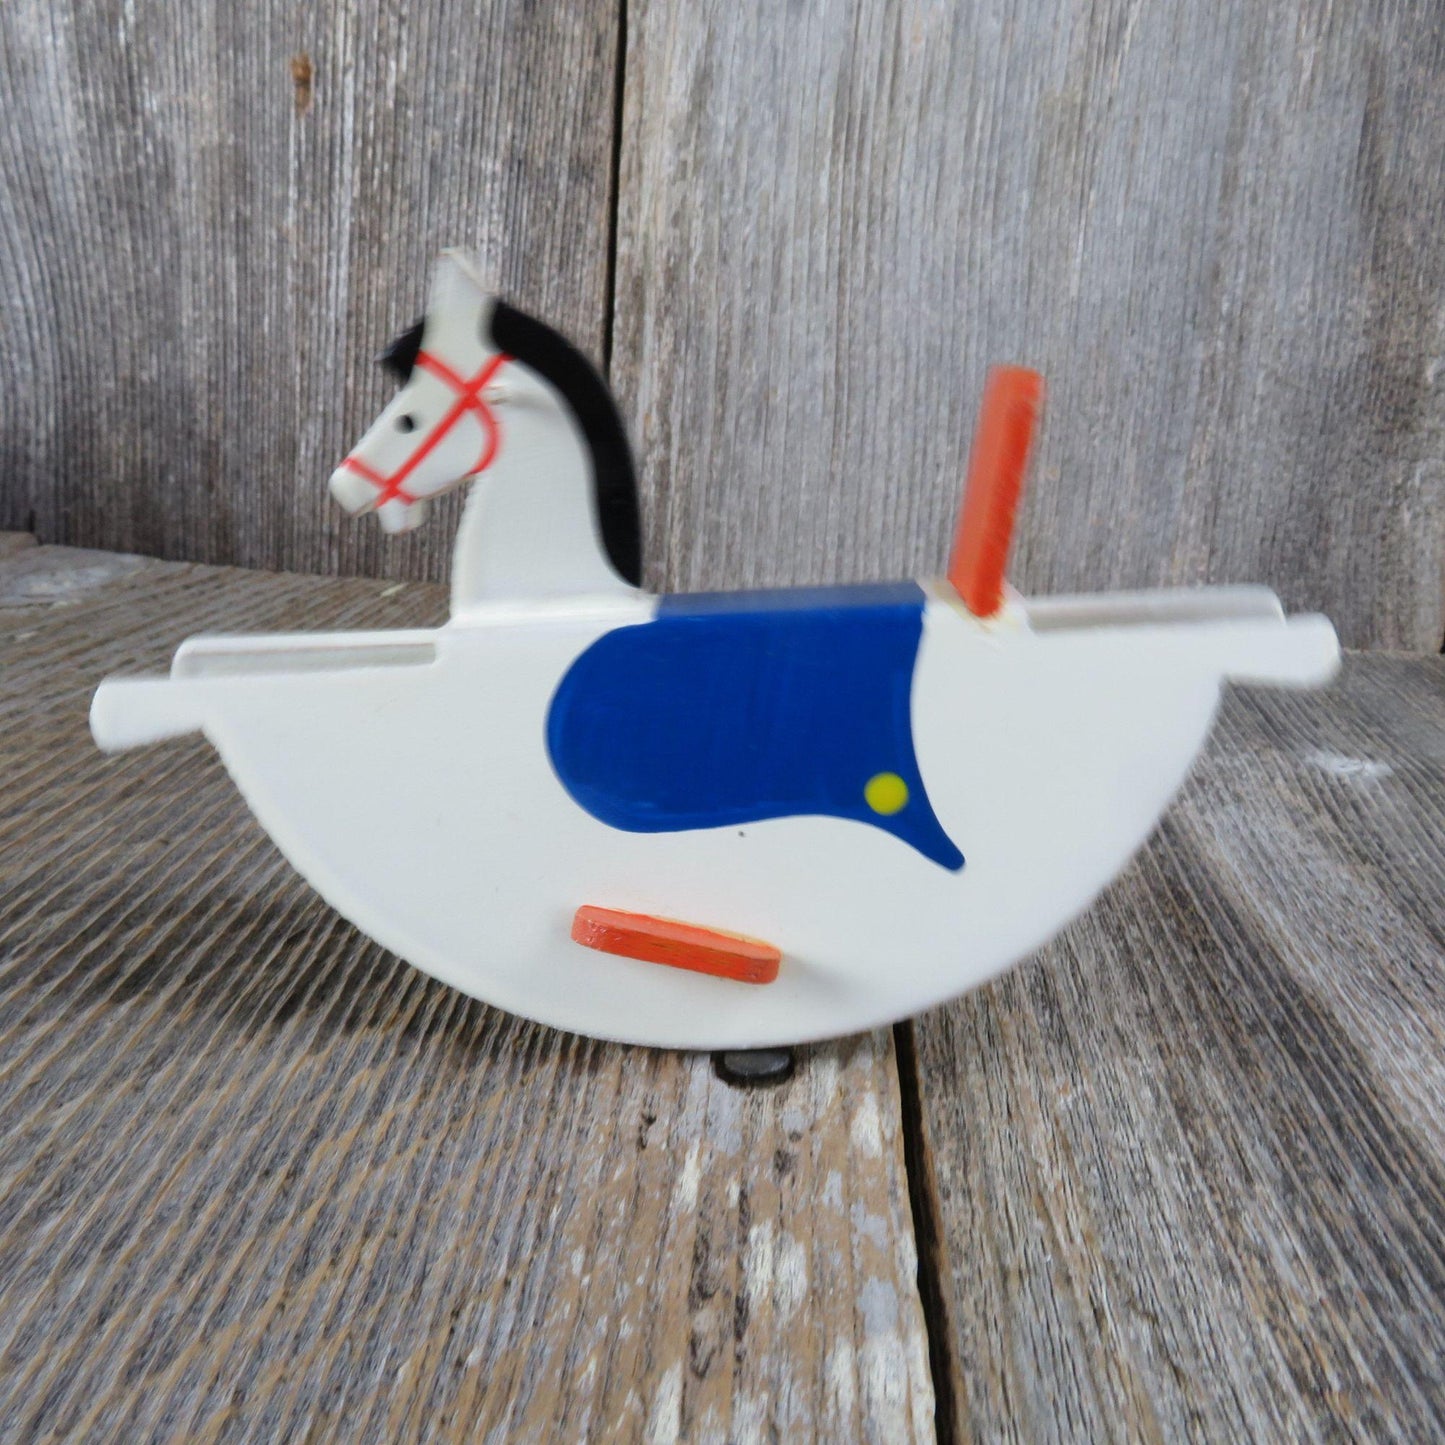 Vintage Miniature Wooden Rocking Horse Toy Figurine White Blue Wood Made in Germany